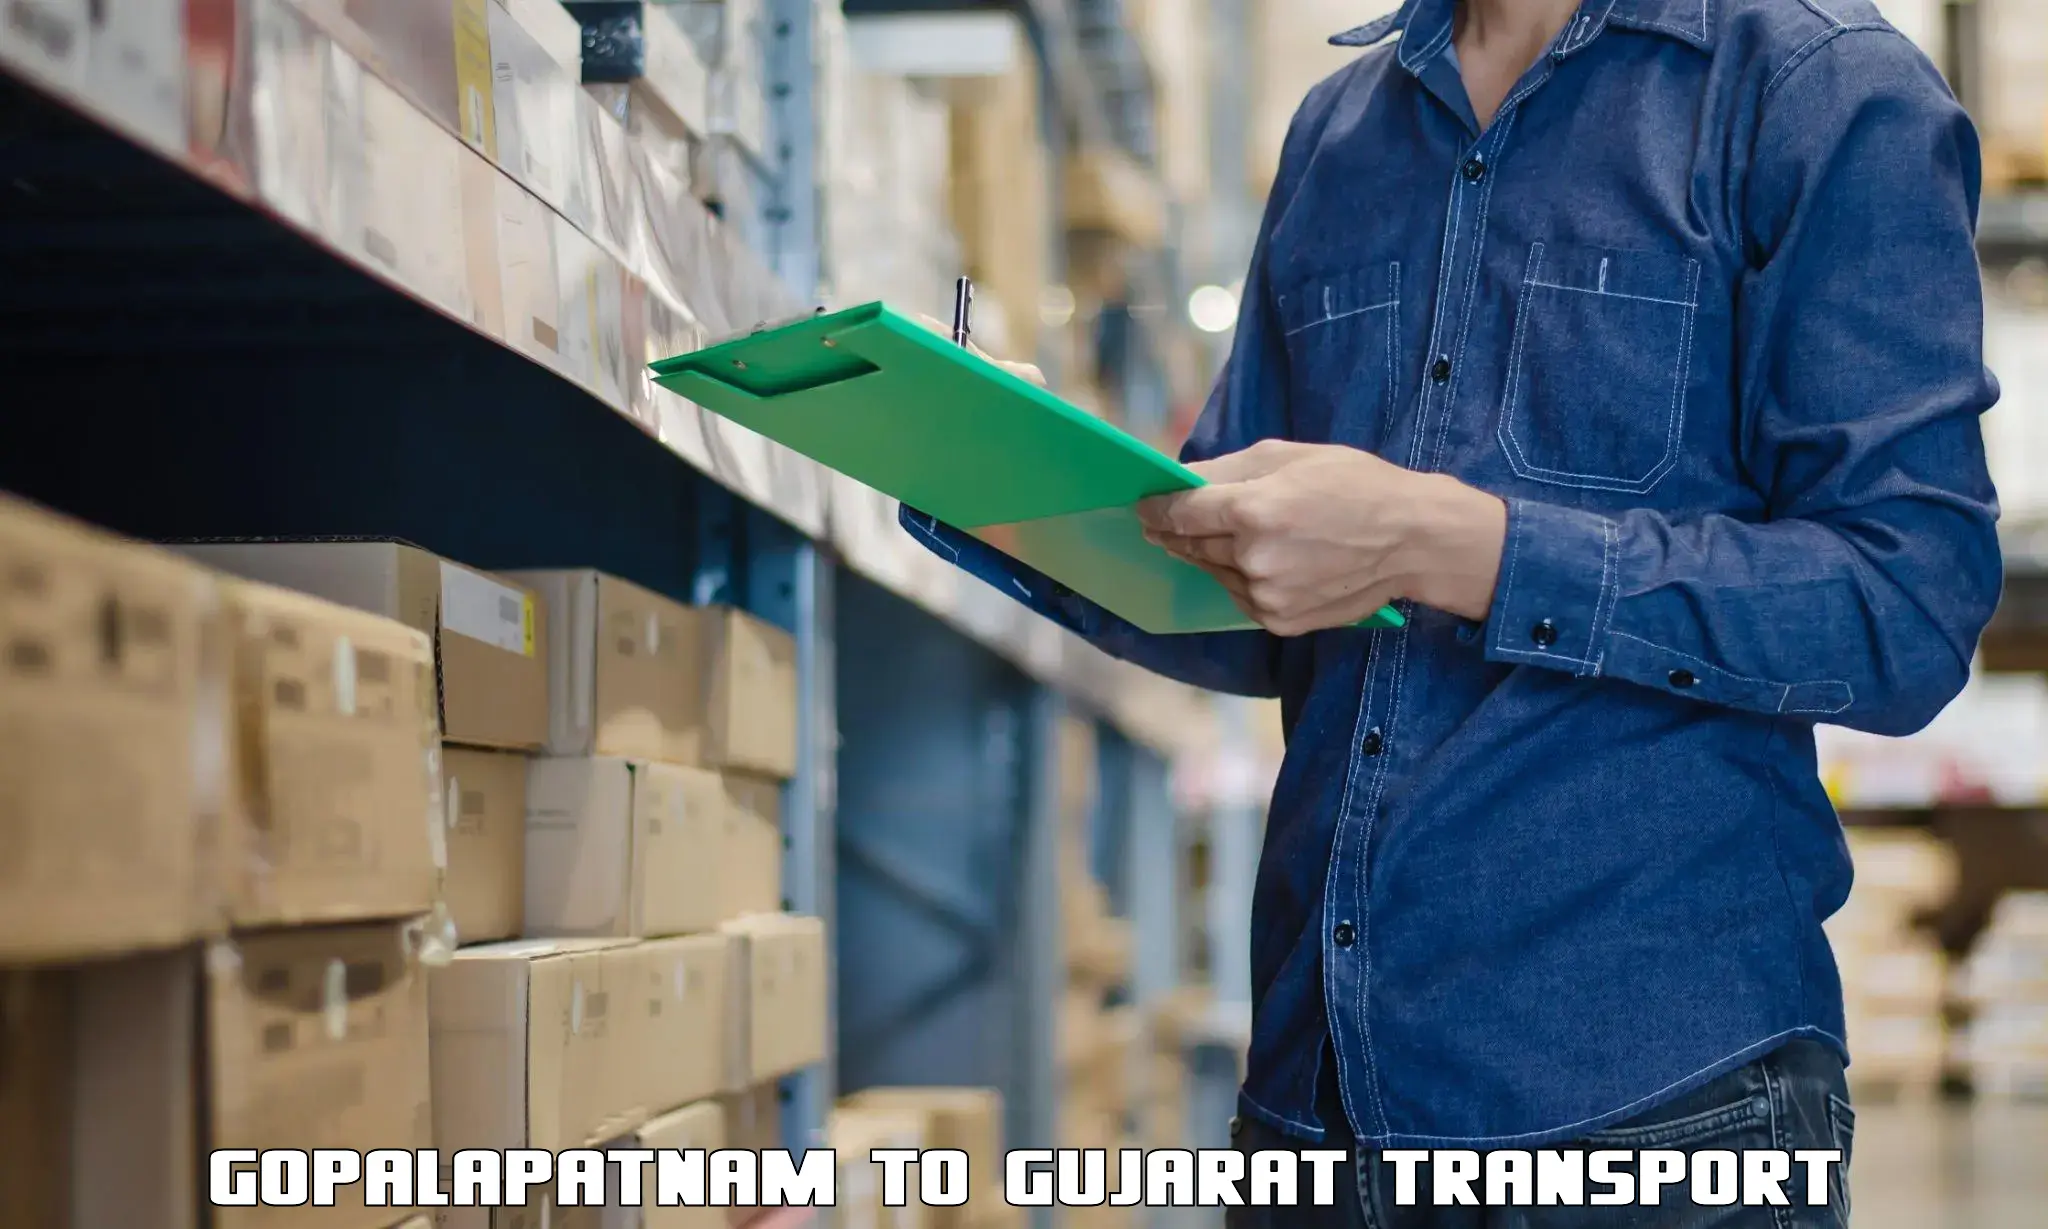 Truck transport companies in India Gopalapatnam to Becharaji